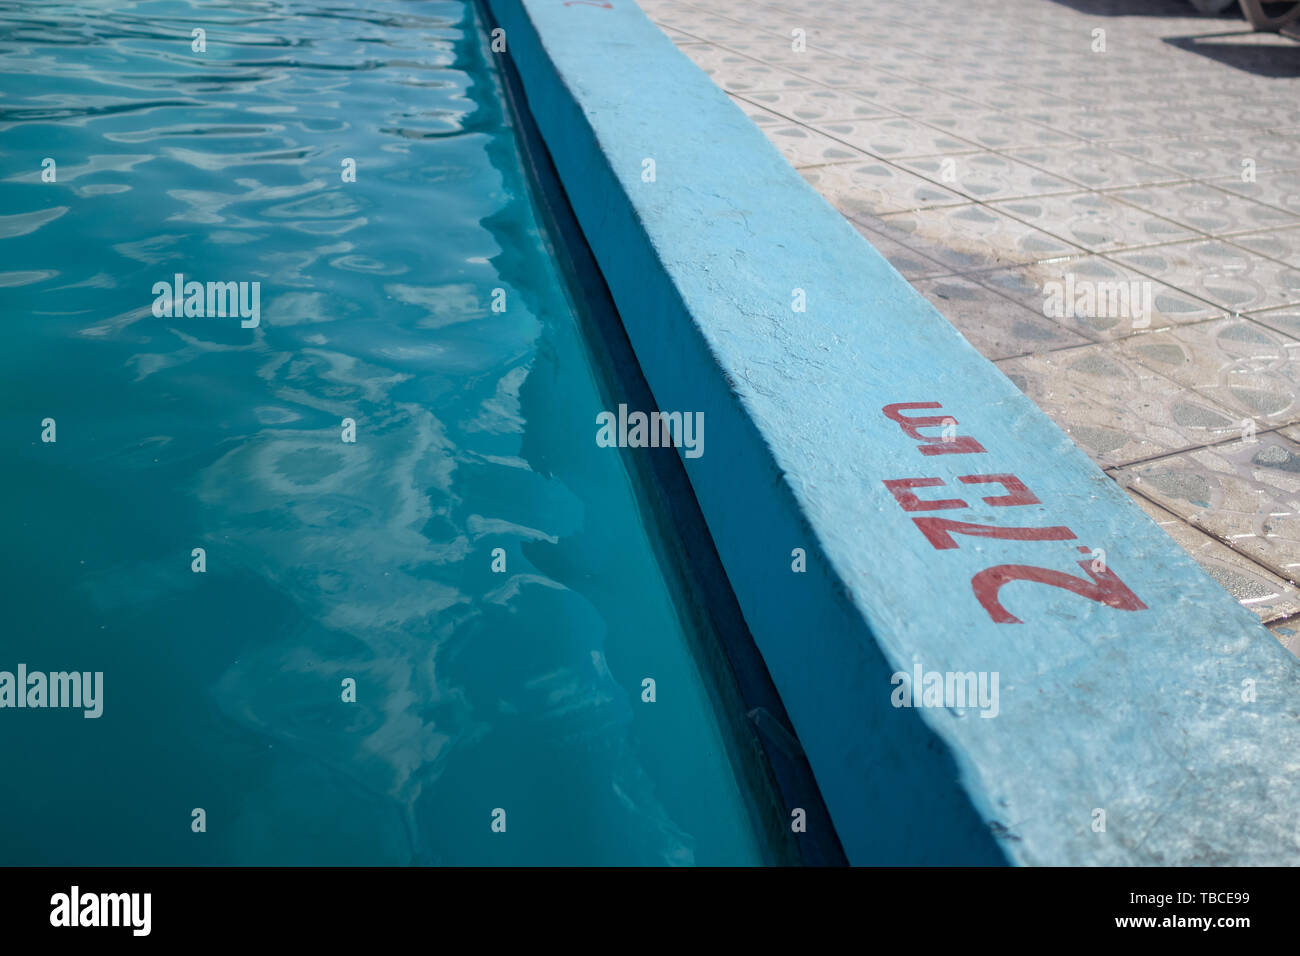 Inviting blue pool with 2.70m depth marking Stock Photo